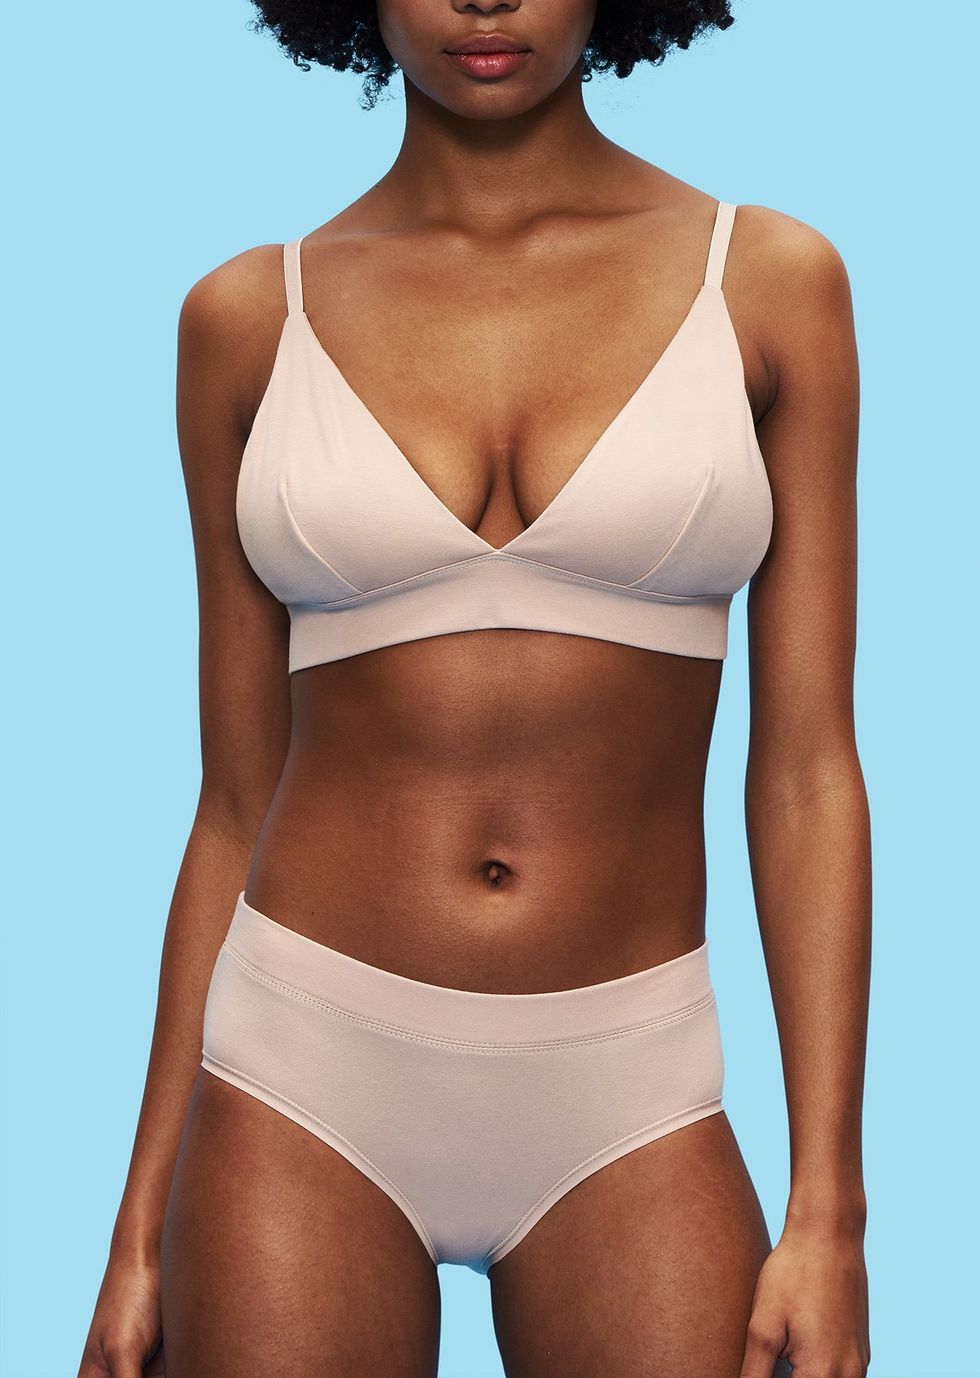 Organic Basics Is Underwear You Can Wear for Weeks Without Washing But WHY?